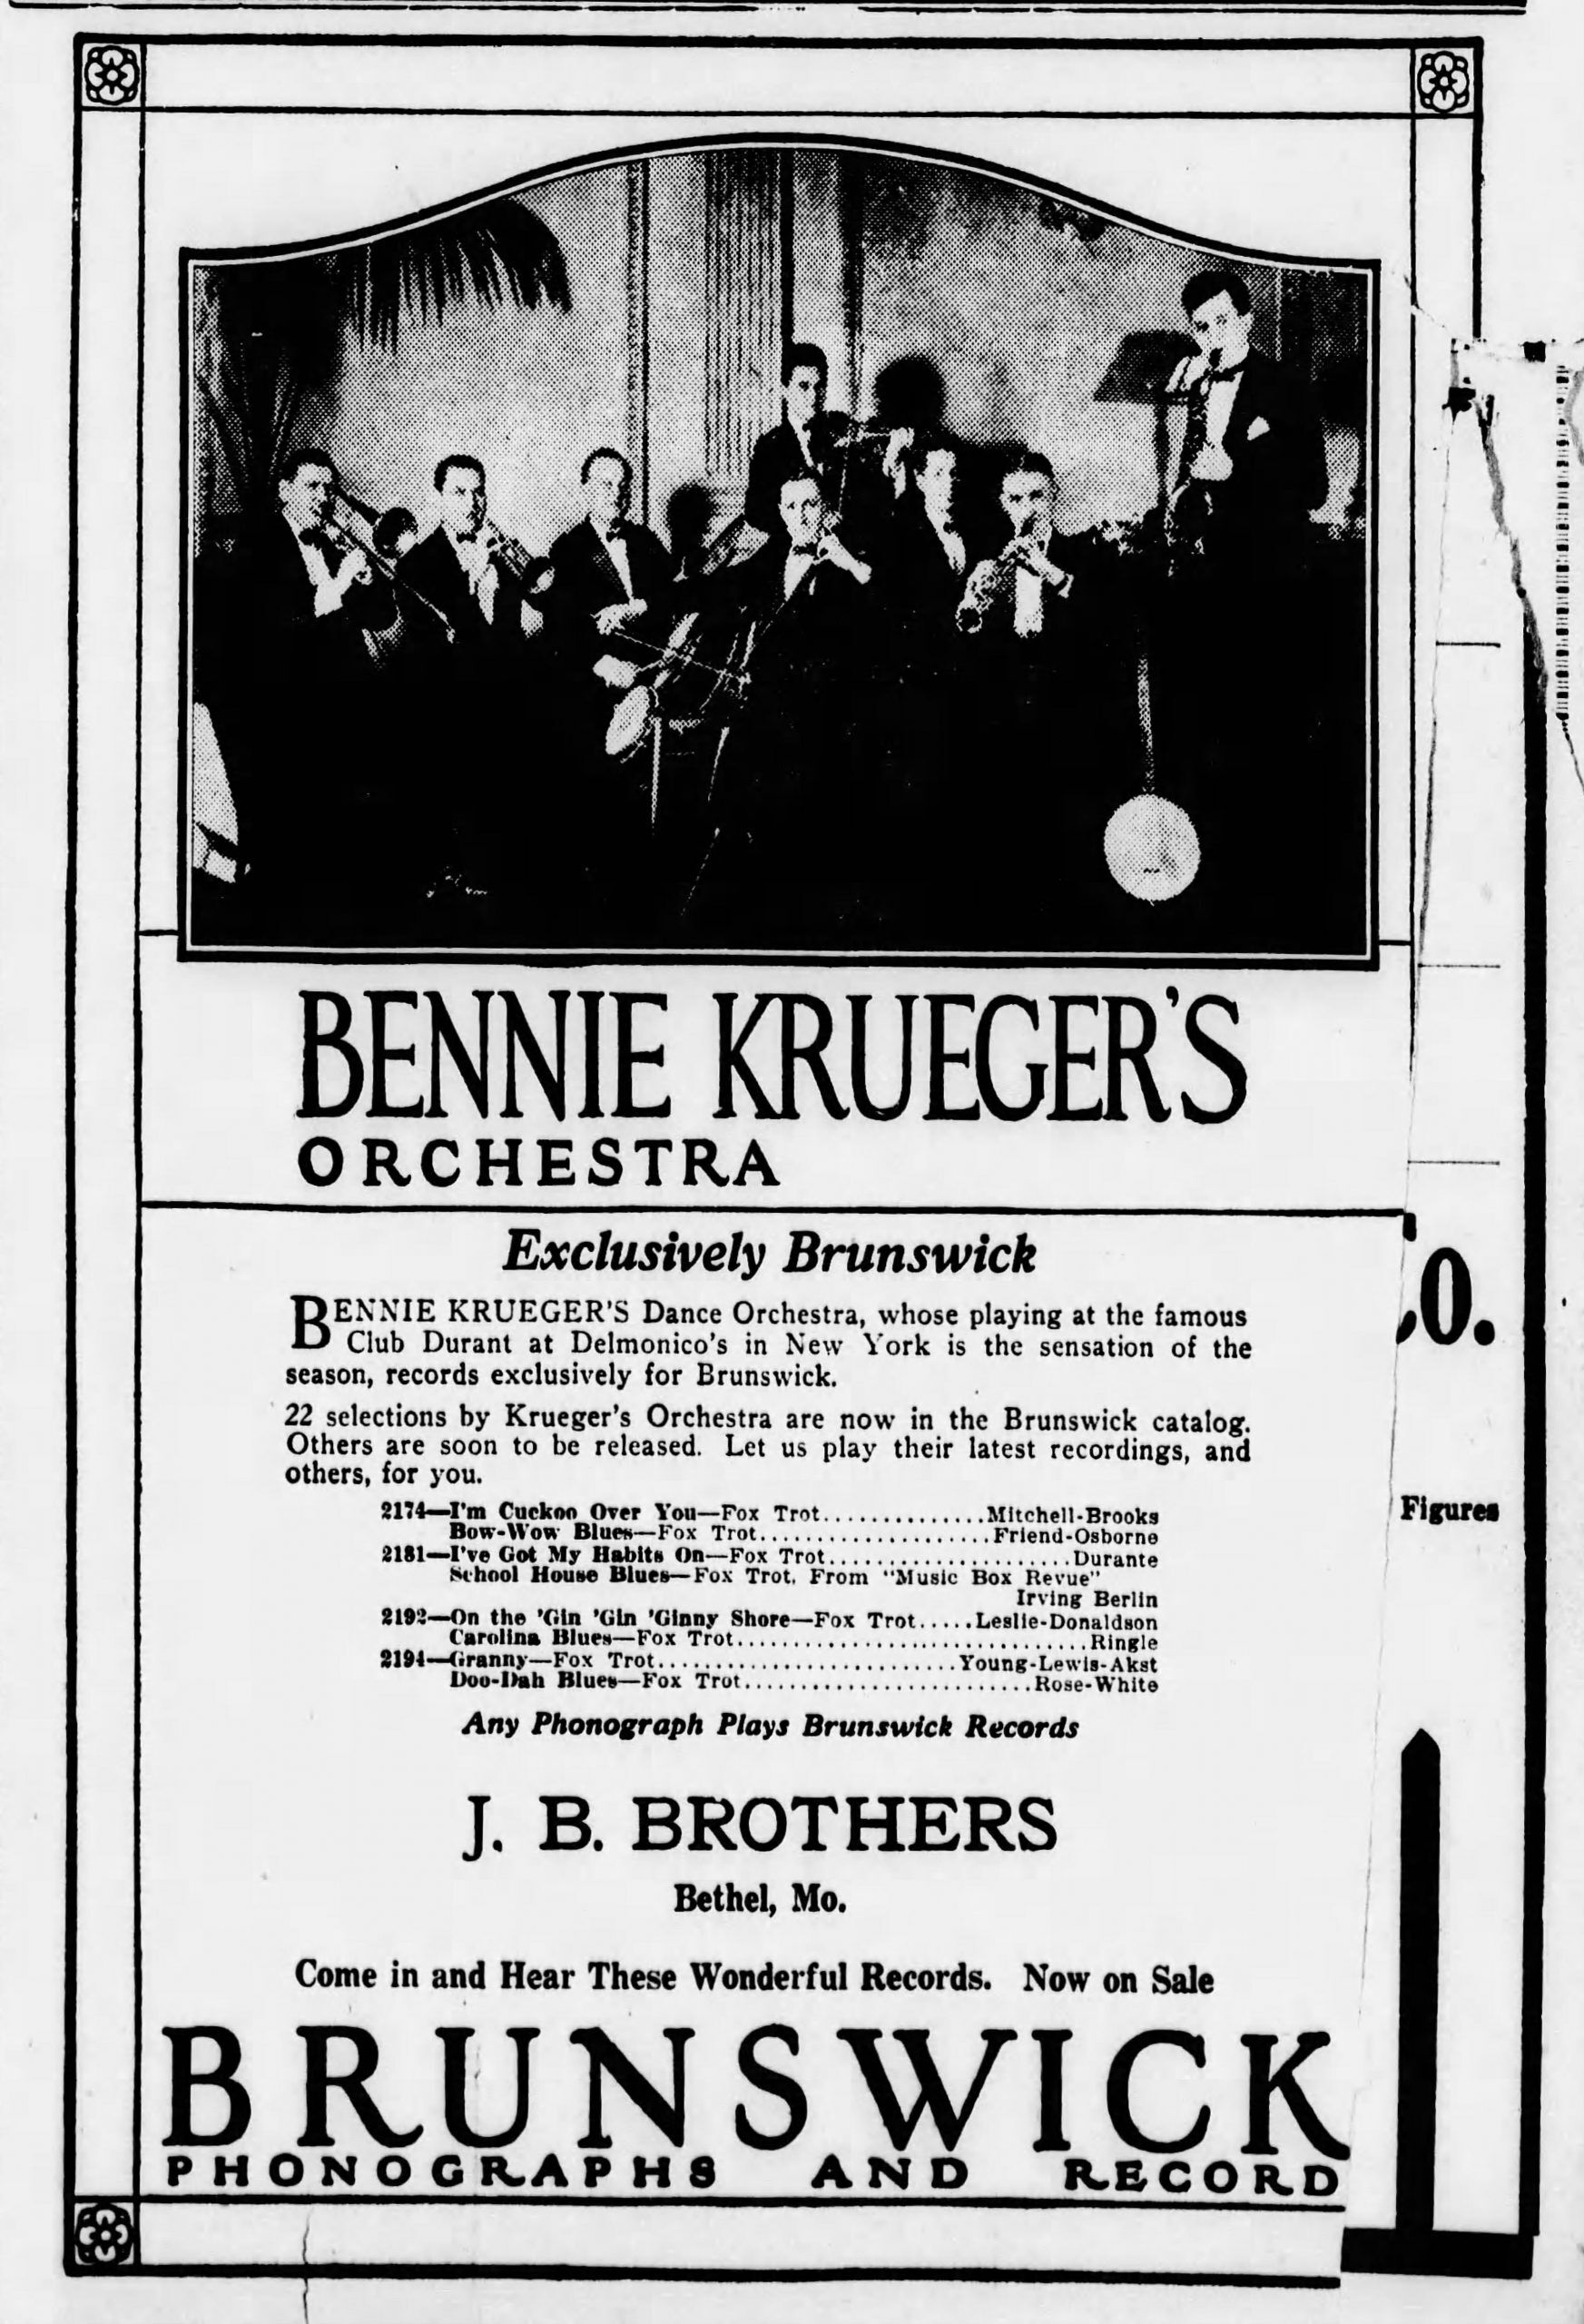 Moonlight Memories: How the Corporate Culture of Brunswick Records Mirrored American Popular Culture of the Early 1920s